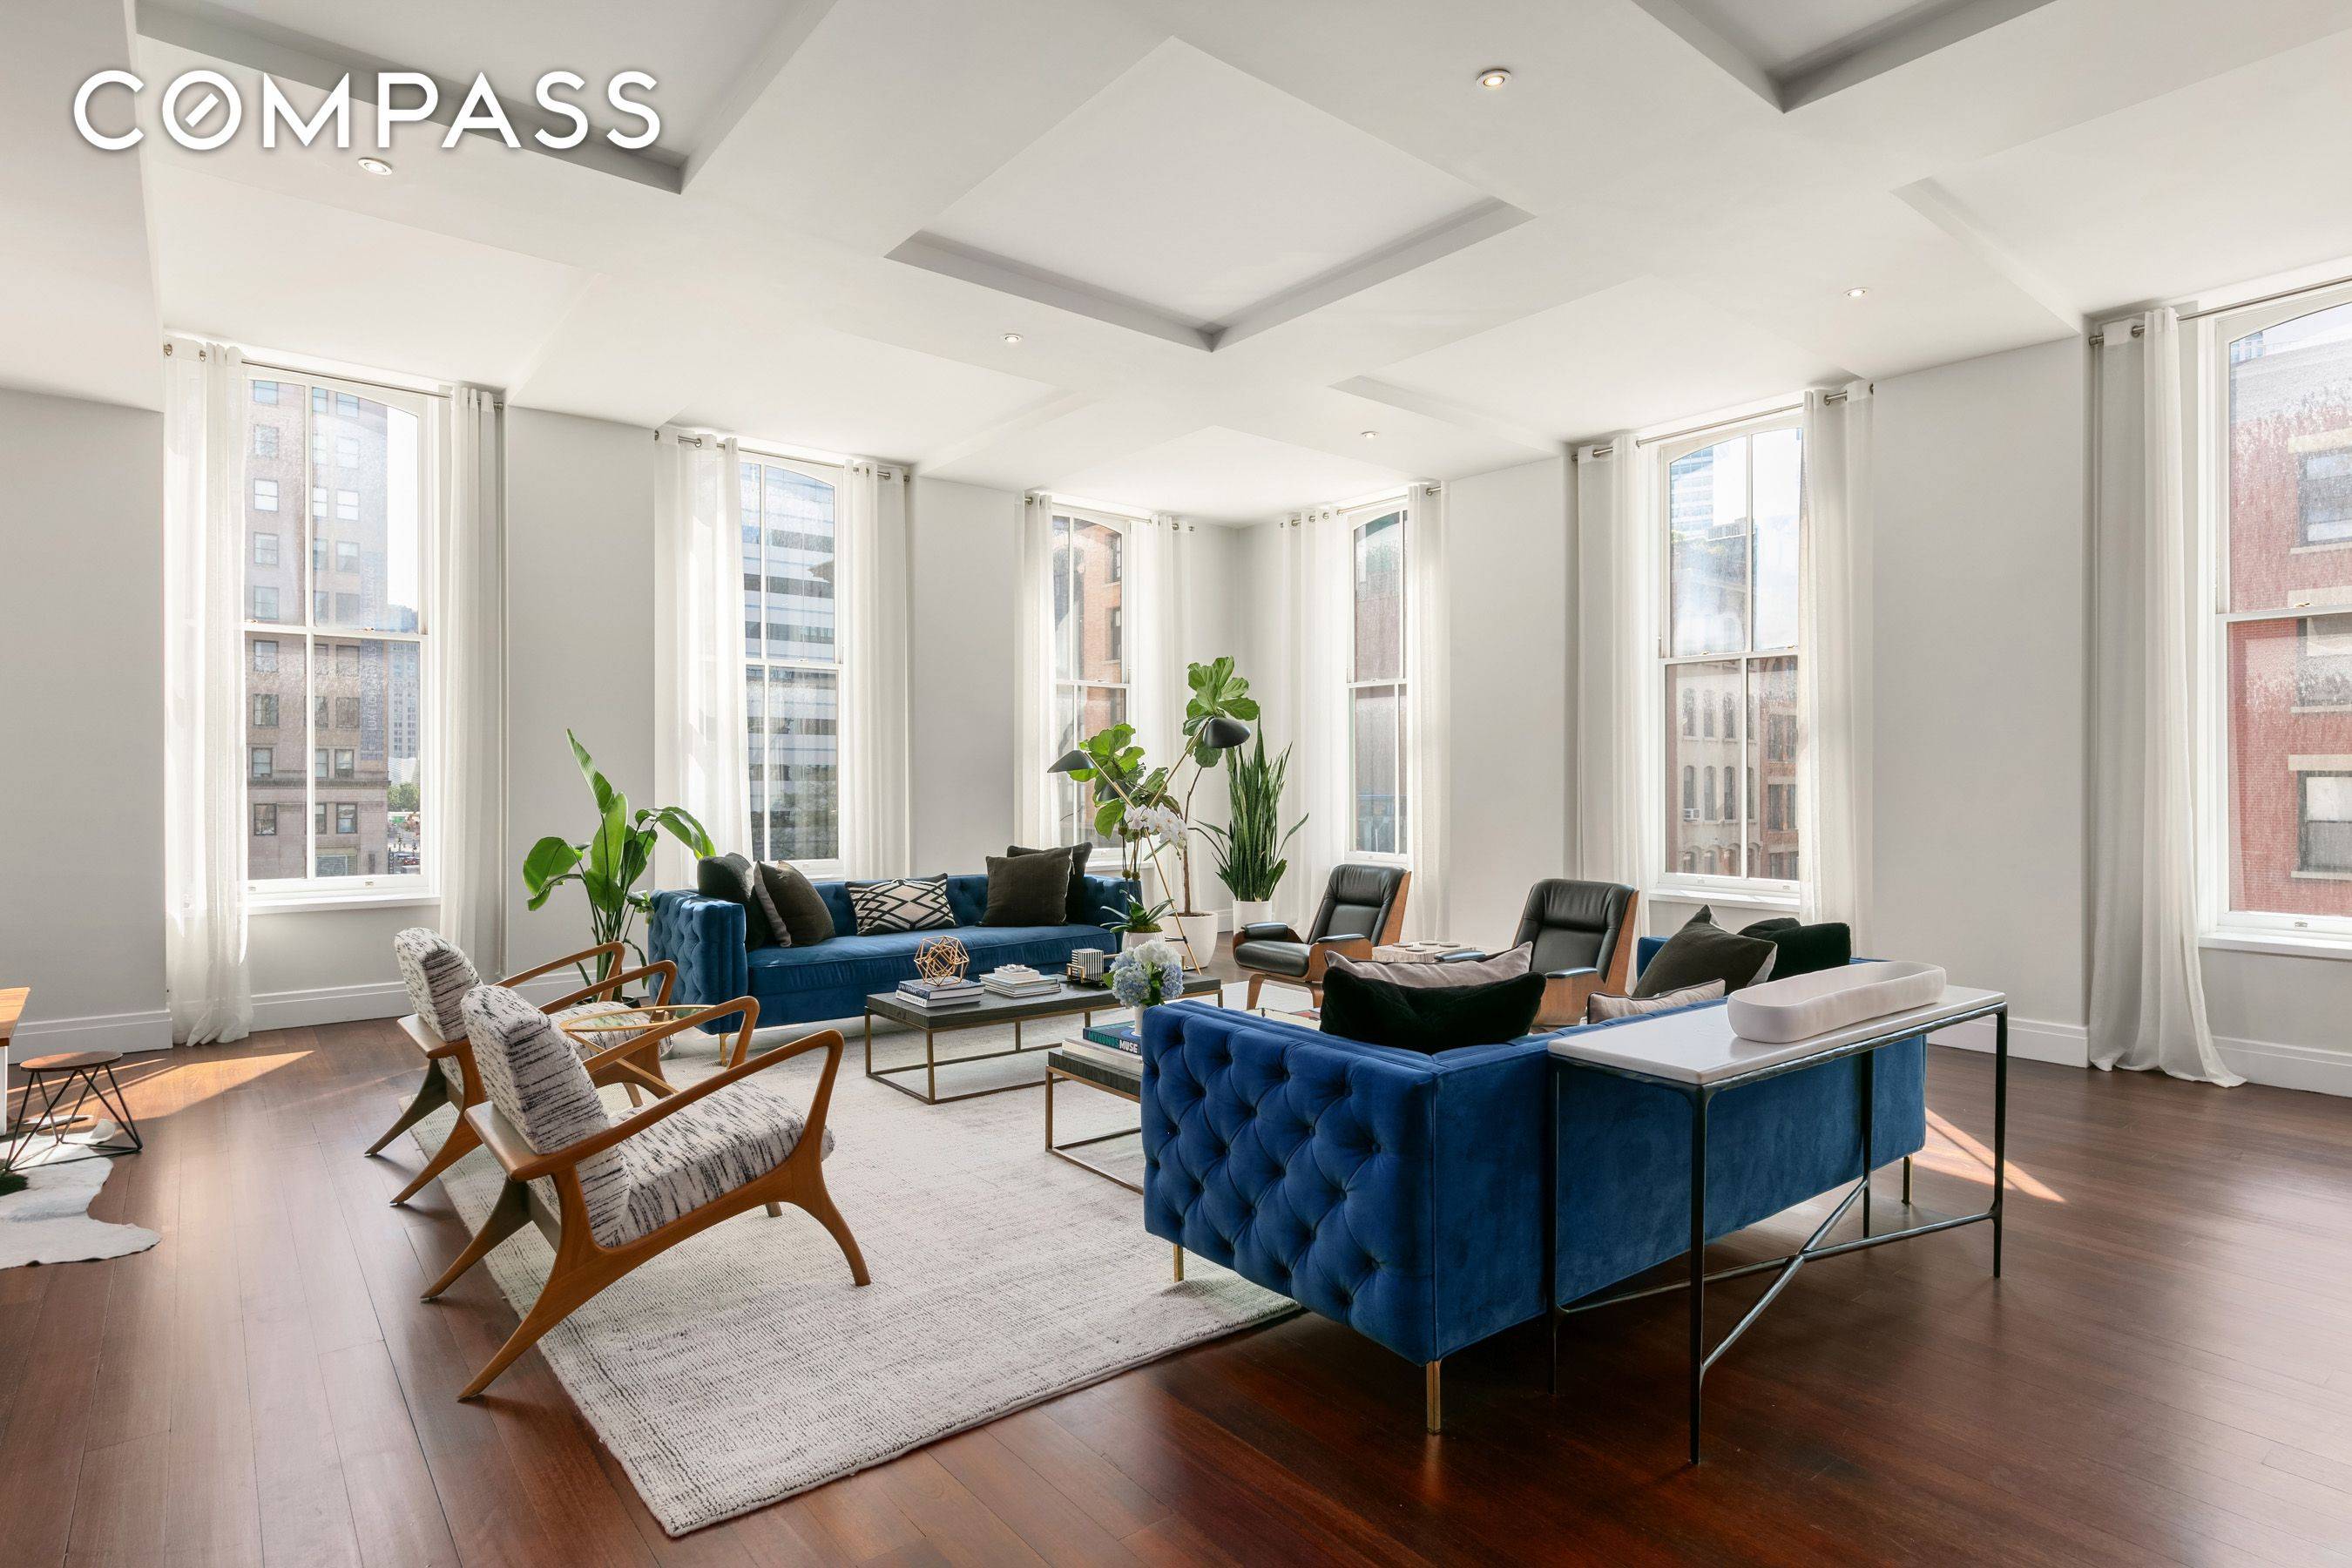 Prominently situated on a prime Tribeca corner, this full floor, 4, 108 square foot, 3 bedroom loft elegantly pairs historic downtown charm with effortless modern luxury.